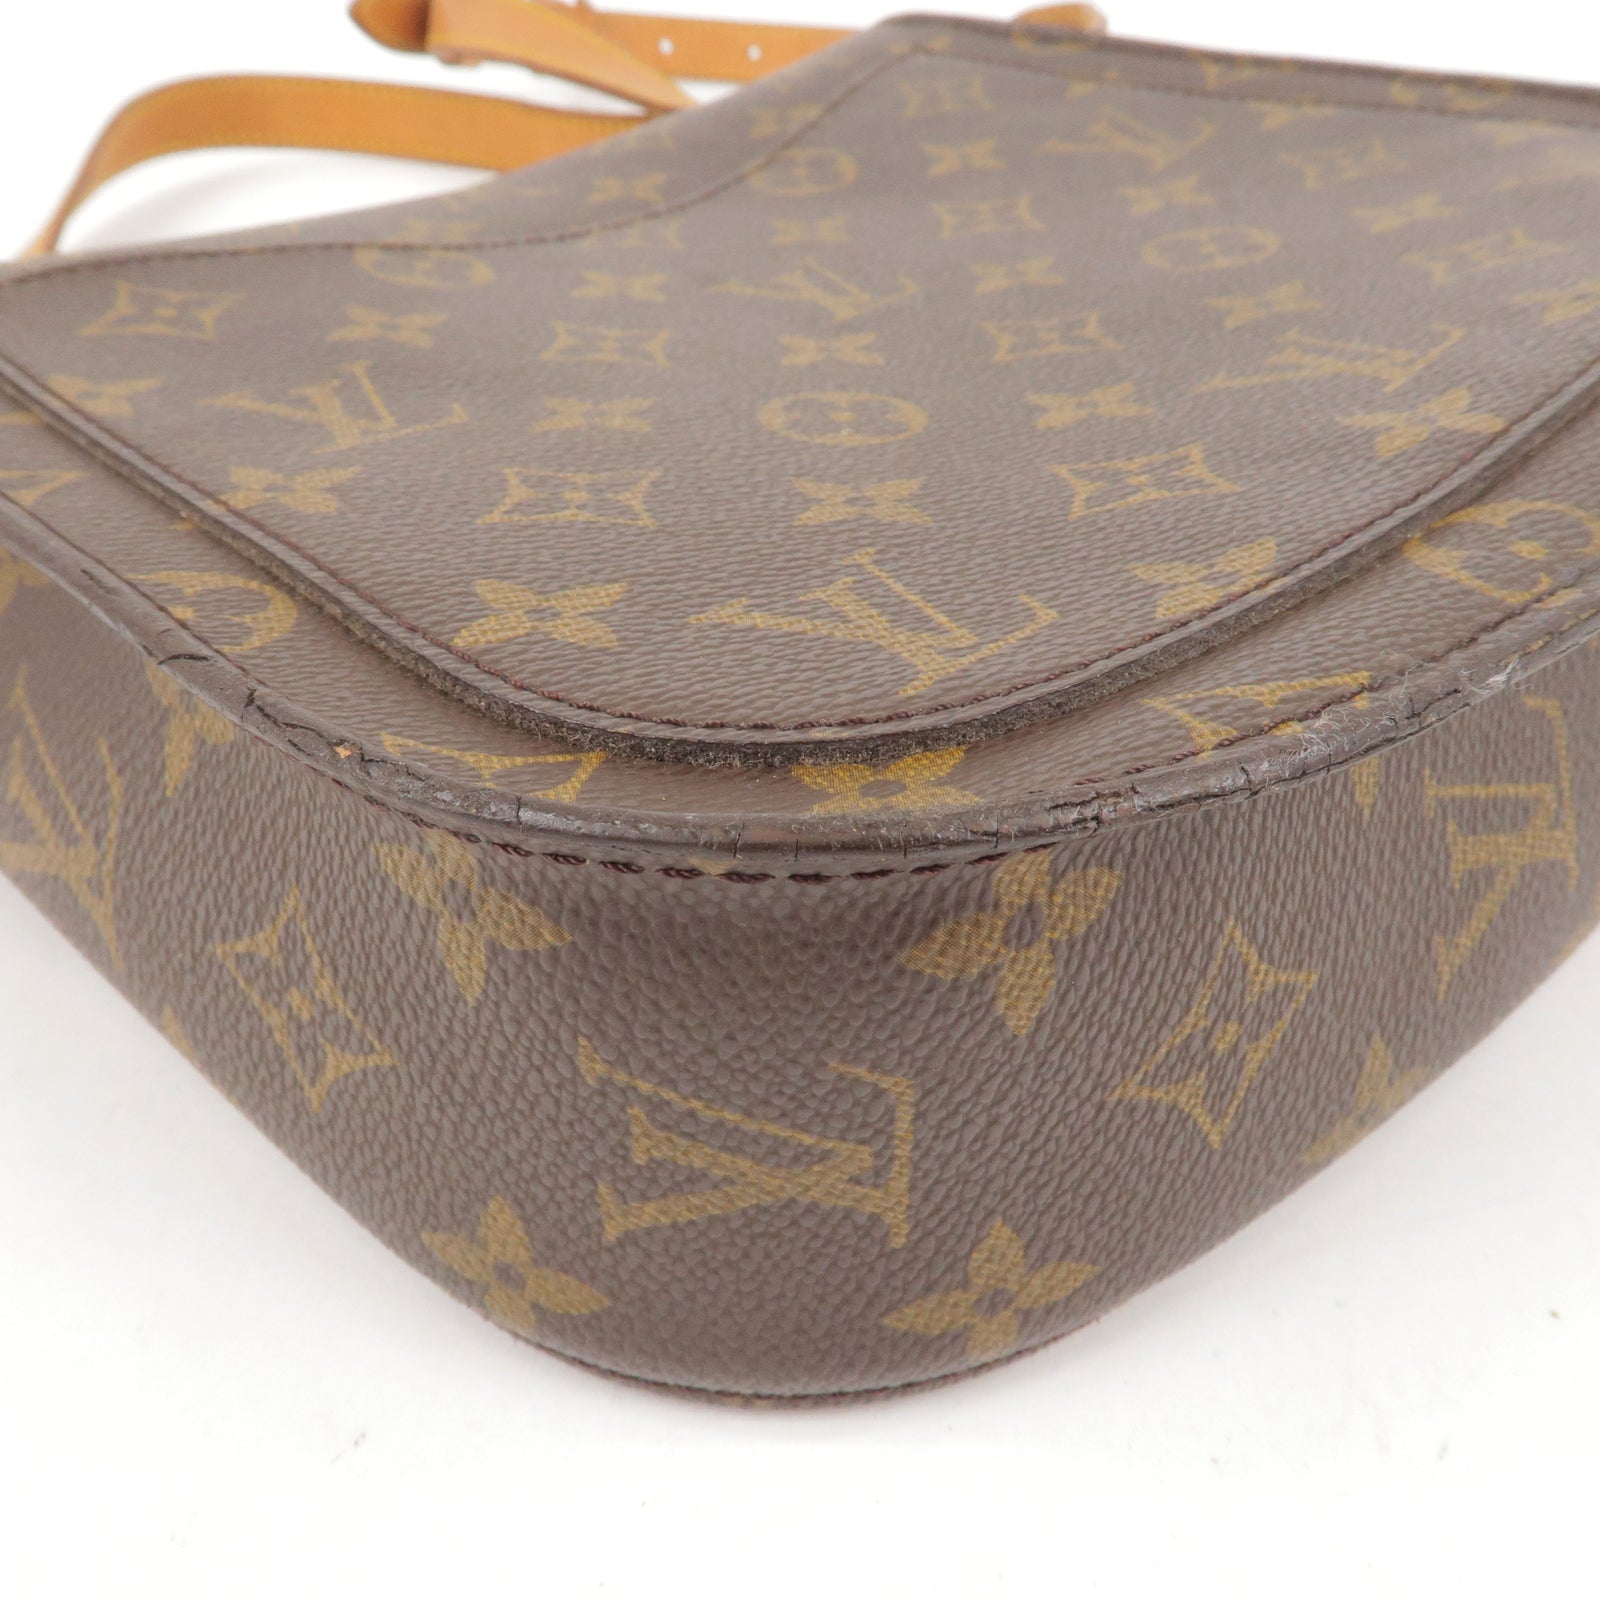 Louis Vuitton 2001 Pre-owned Reporter PM Crossbody Bag